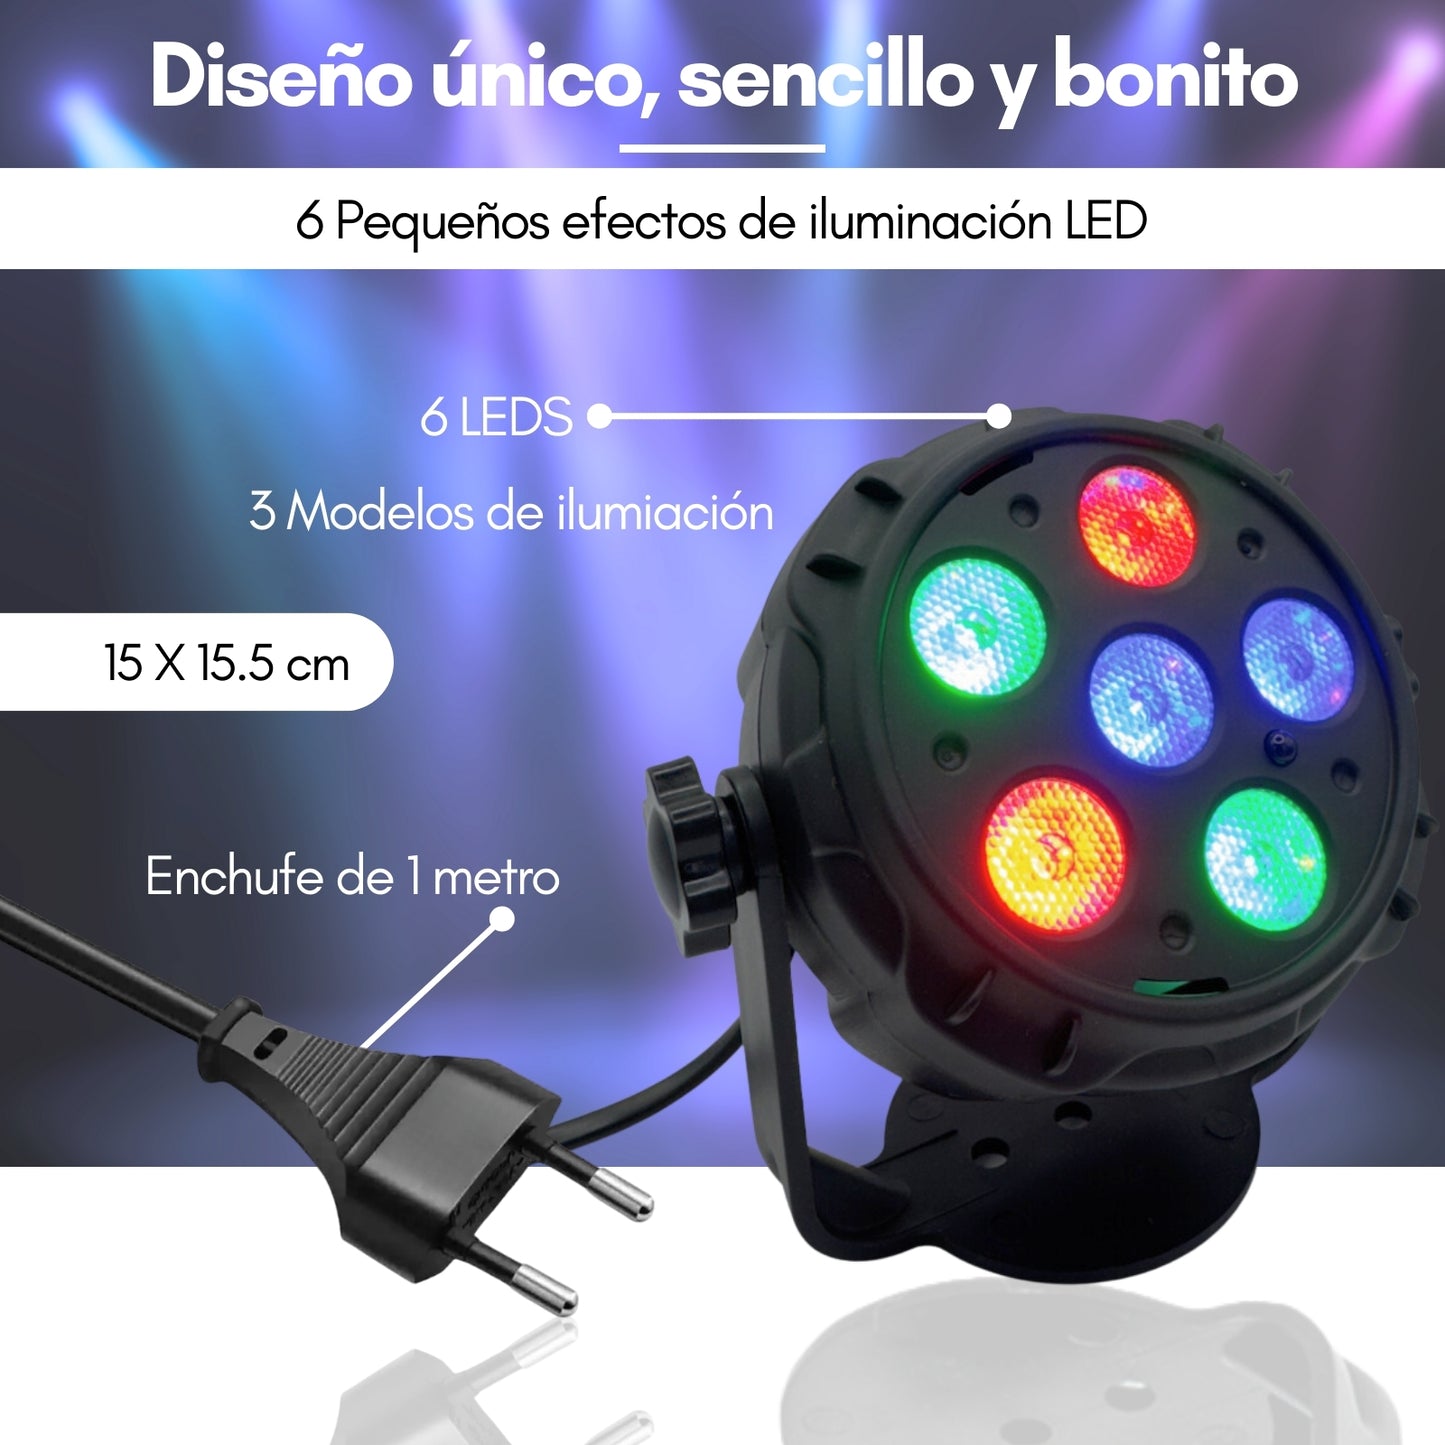 LED SPOTLIGHT WITH REMOTE CONTROL AND SPEAKER